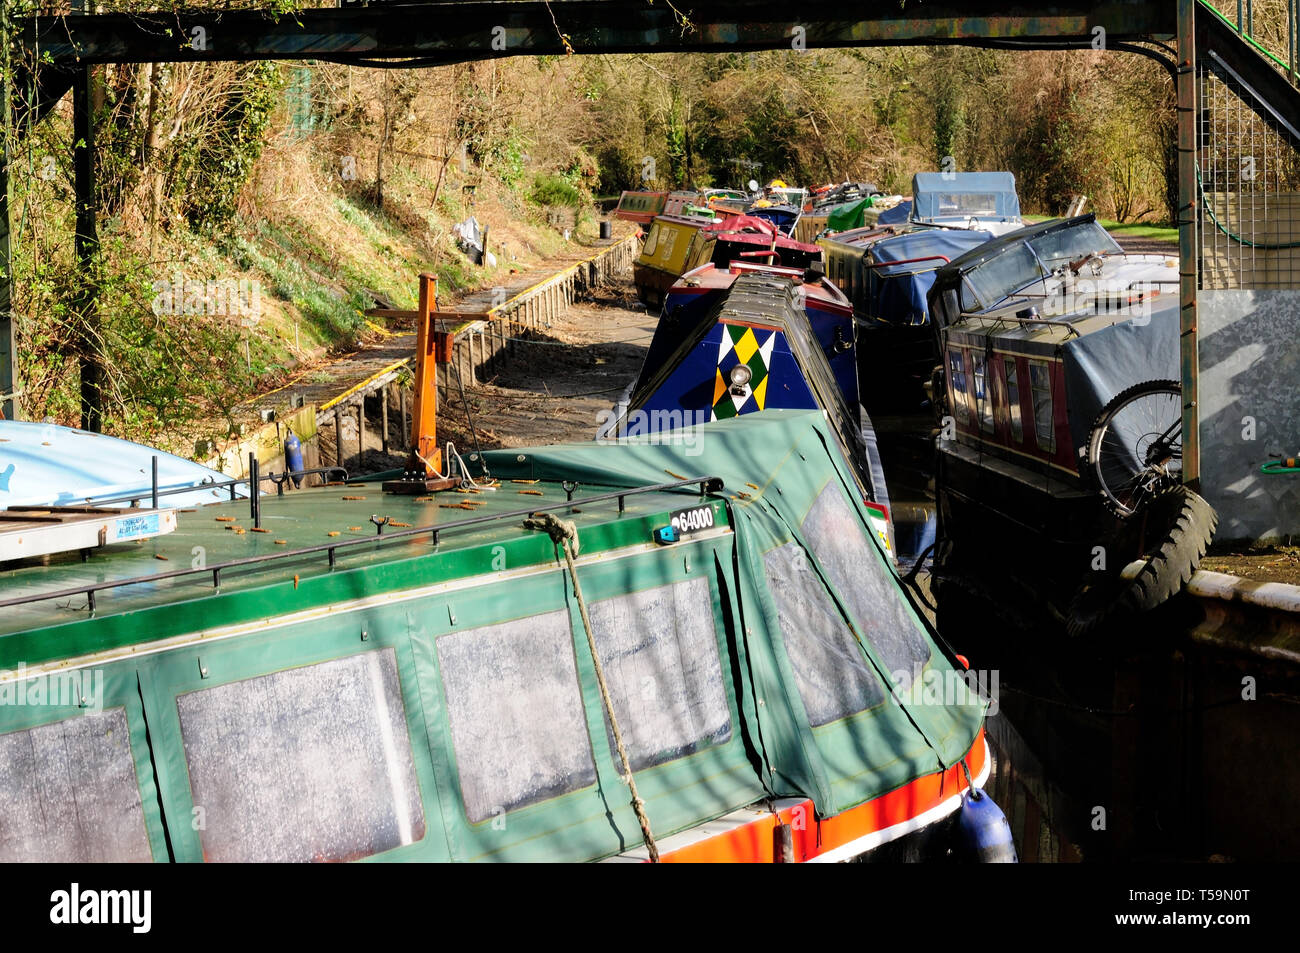 Boats grounded in an empty canal that has been drained for maintenance purposes. Stock Photo